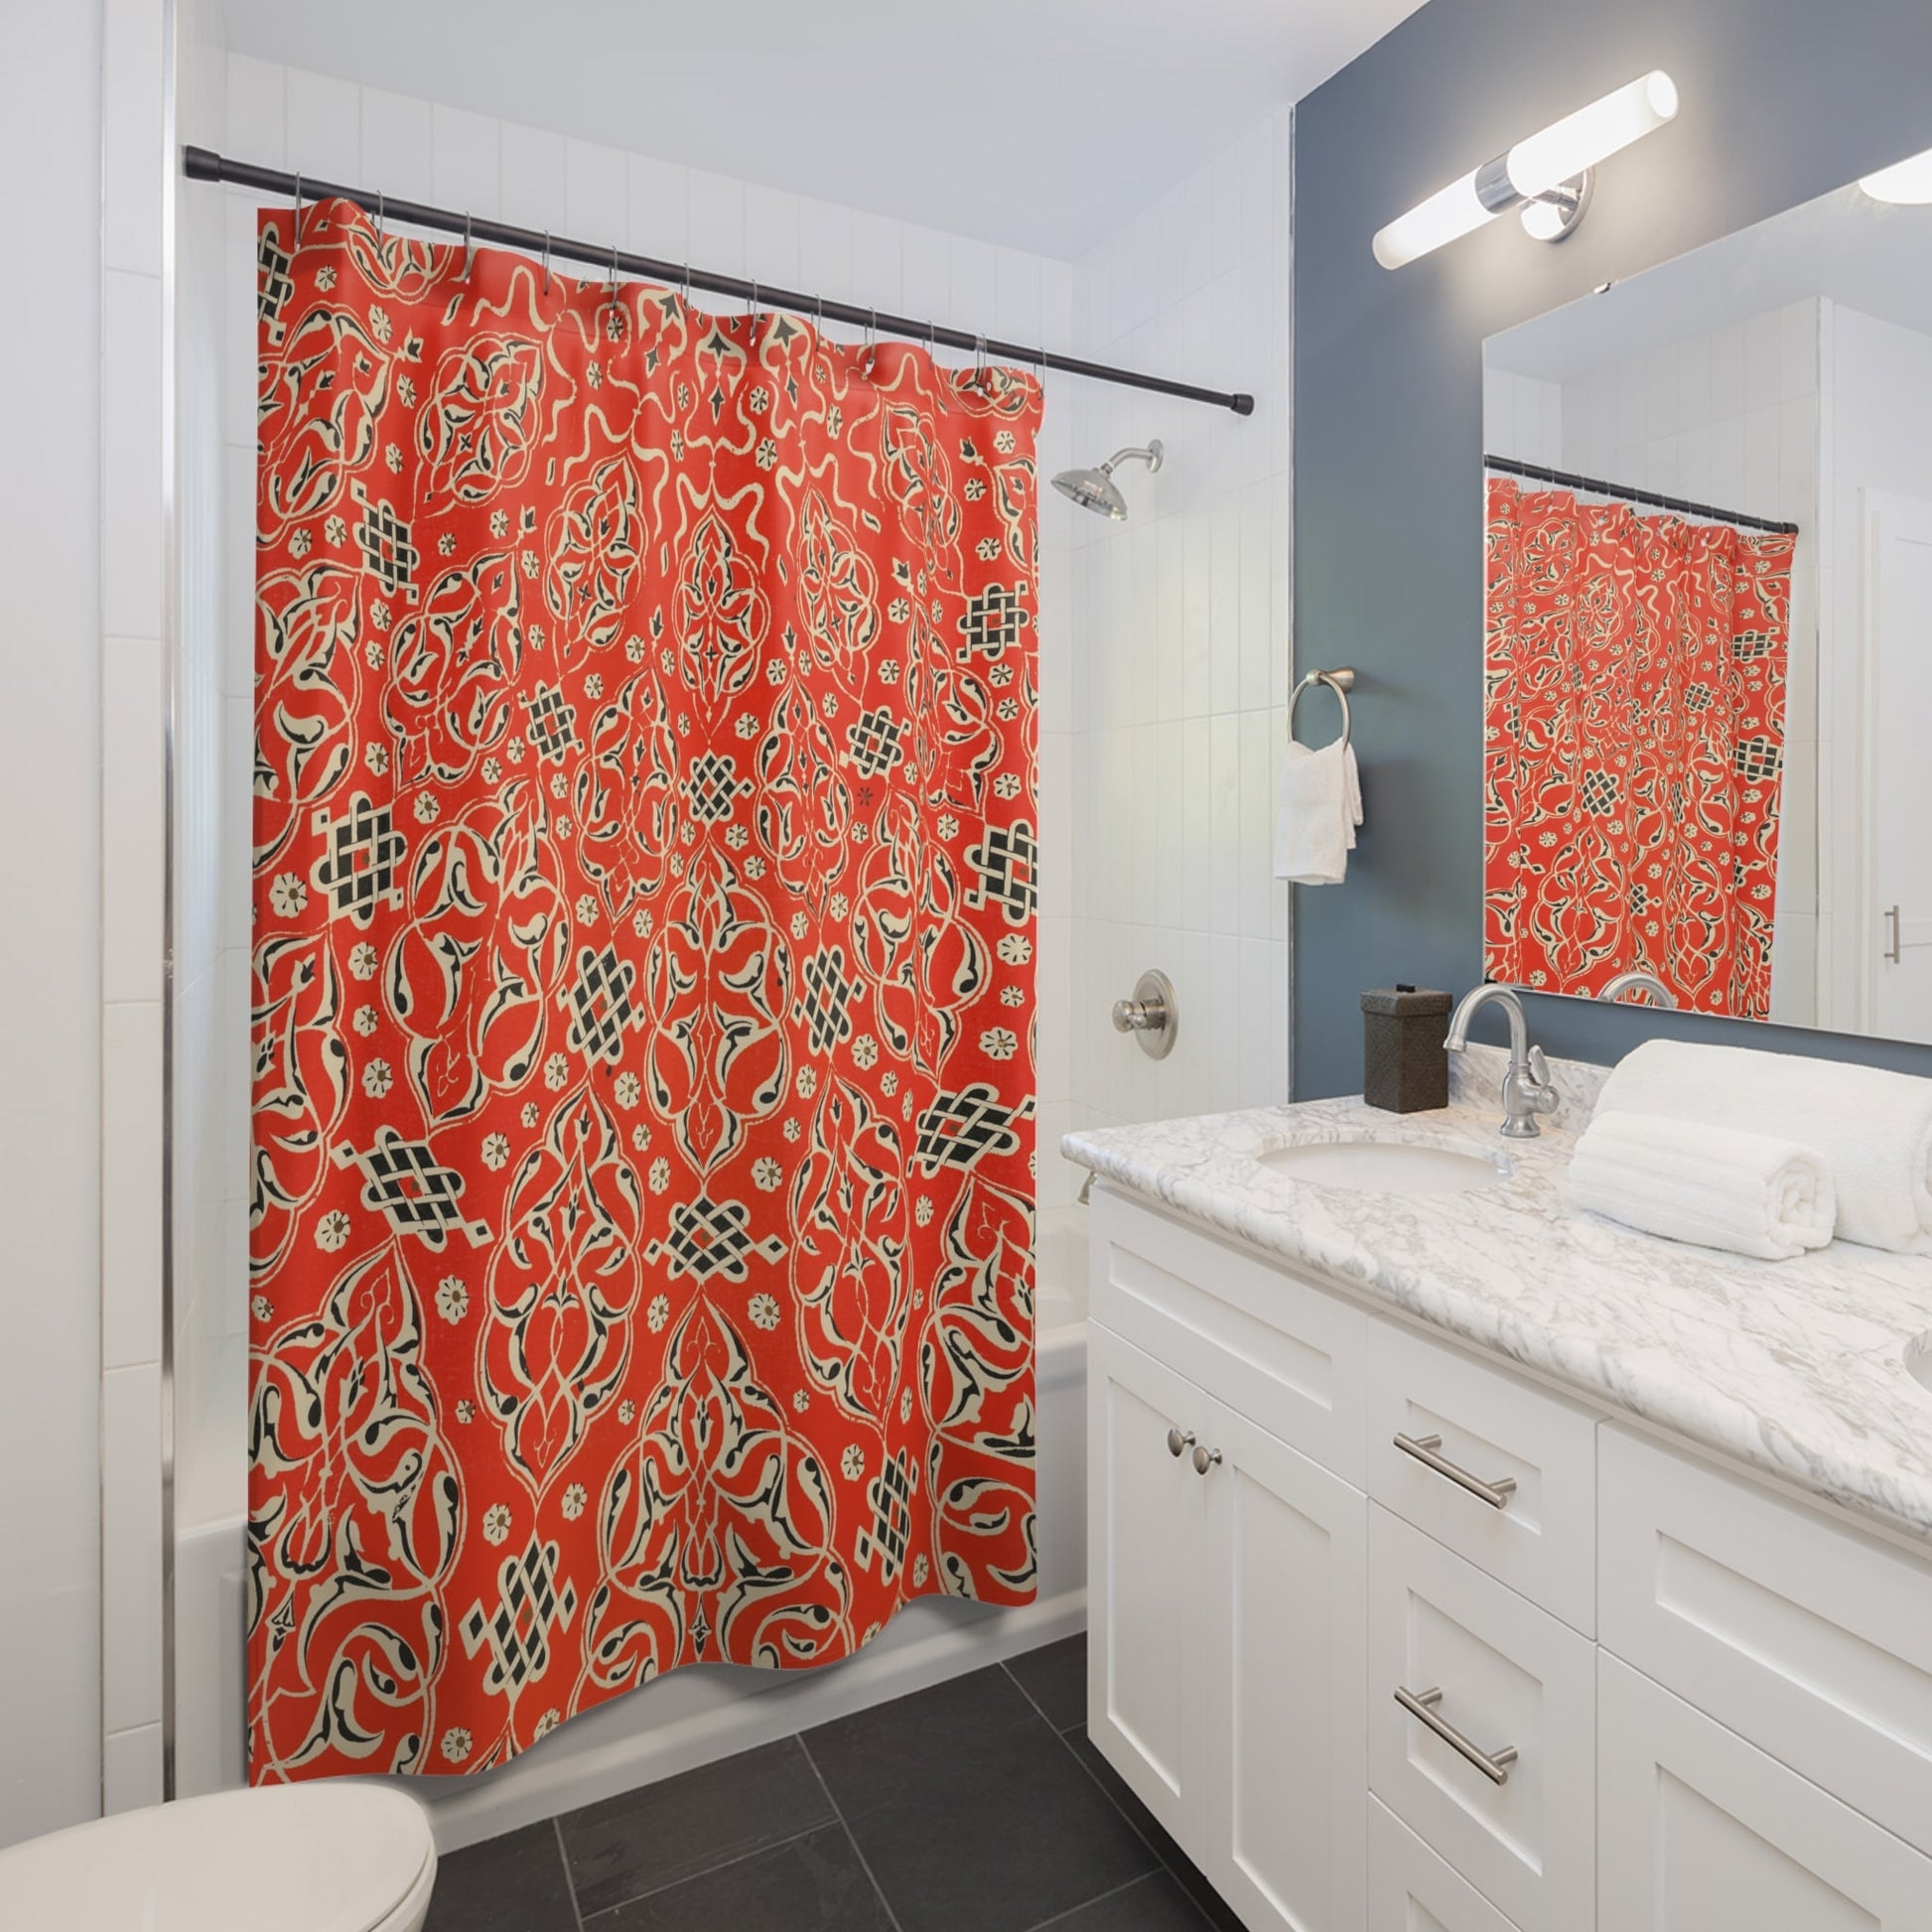 Bright Red Pattern Shower Curtain Best Bathroom Decorating Ideas for Abstract Decor